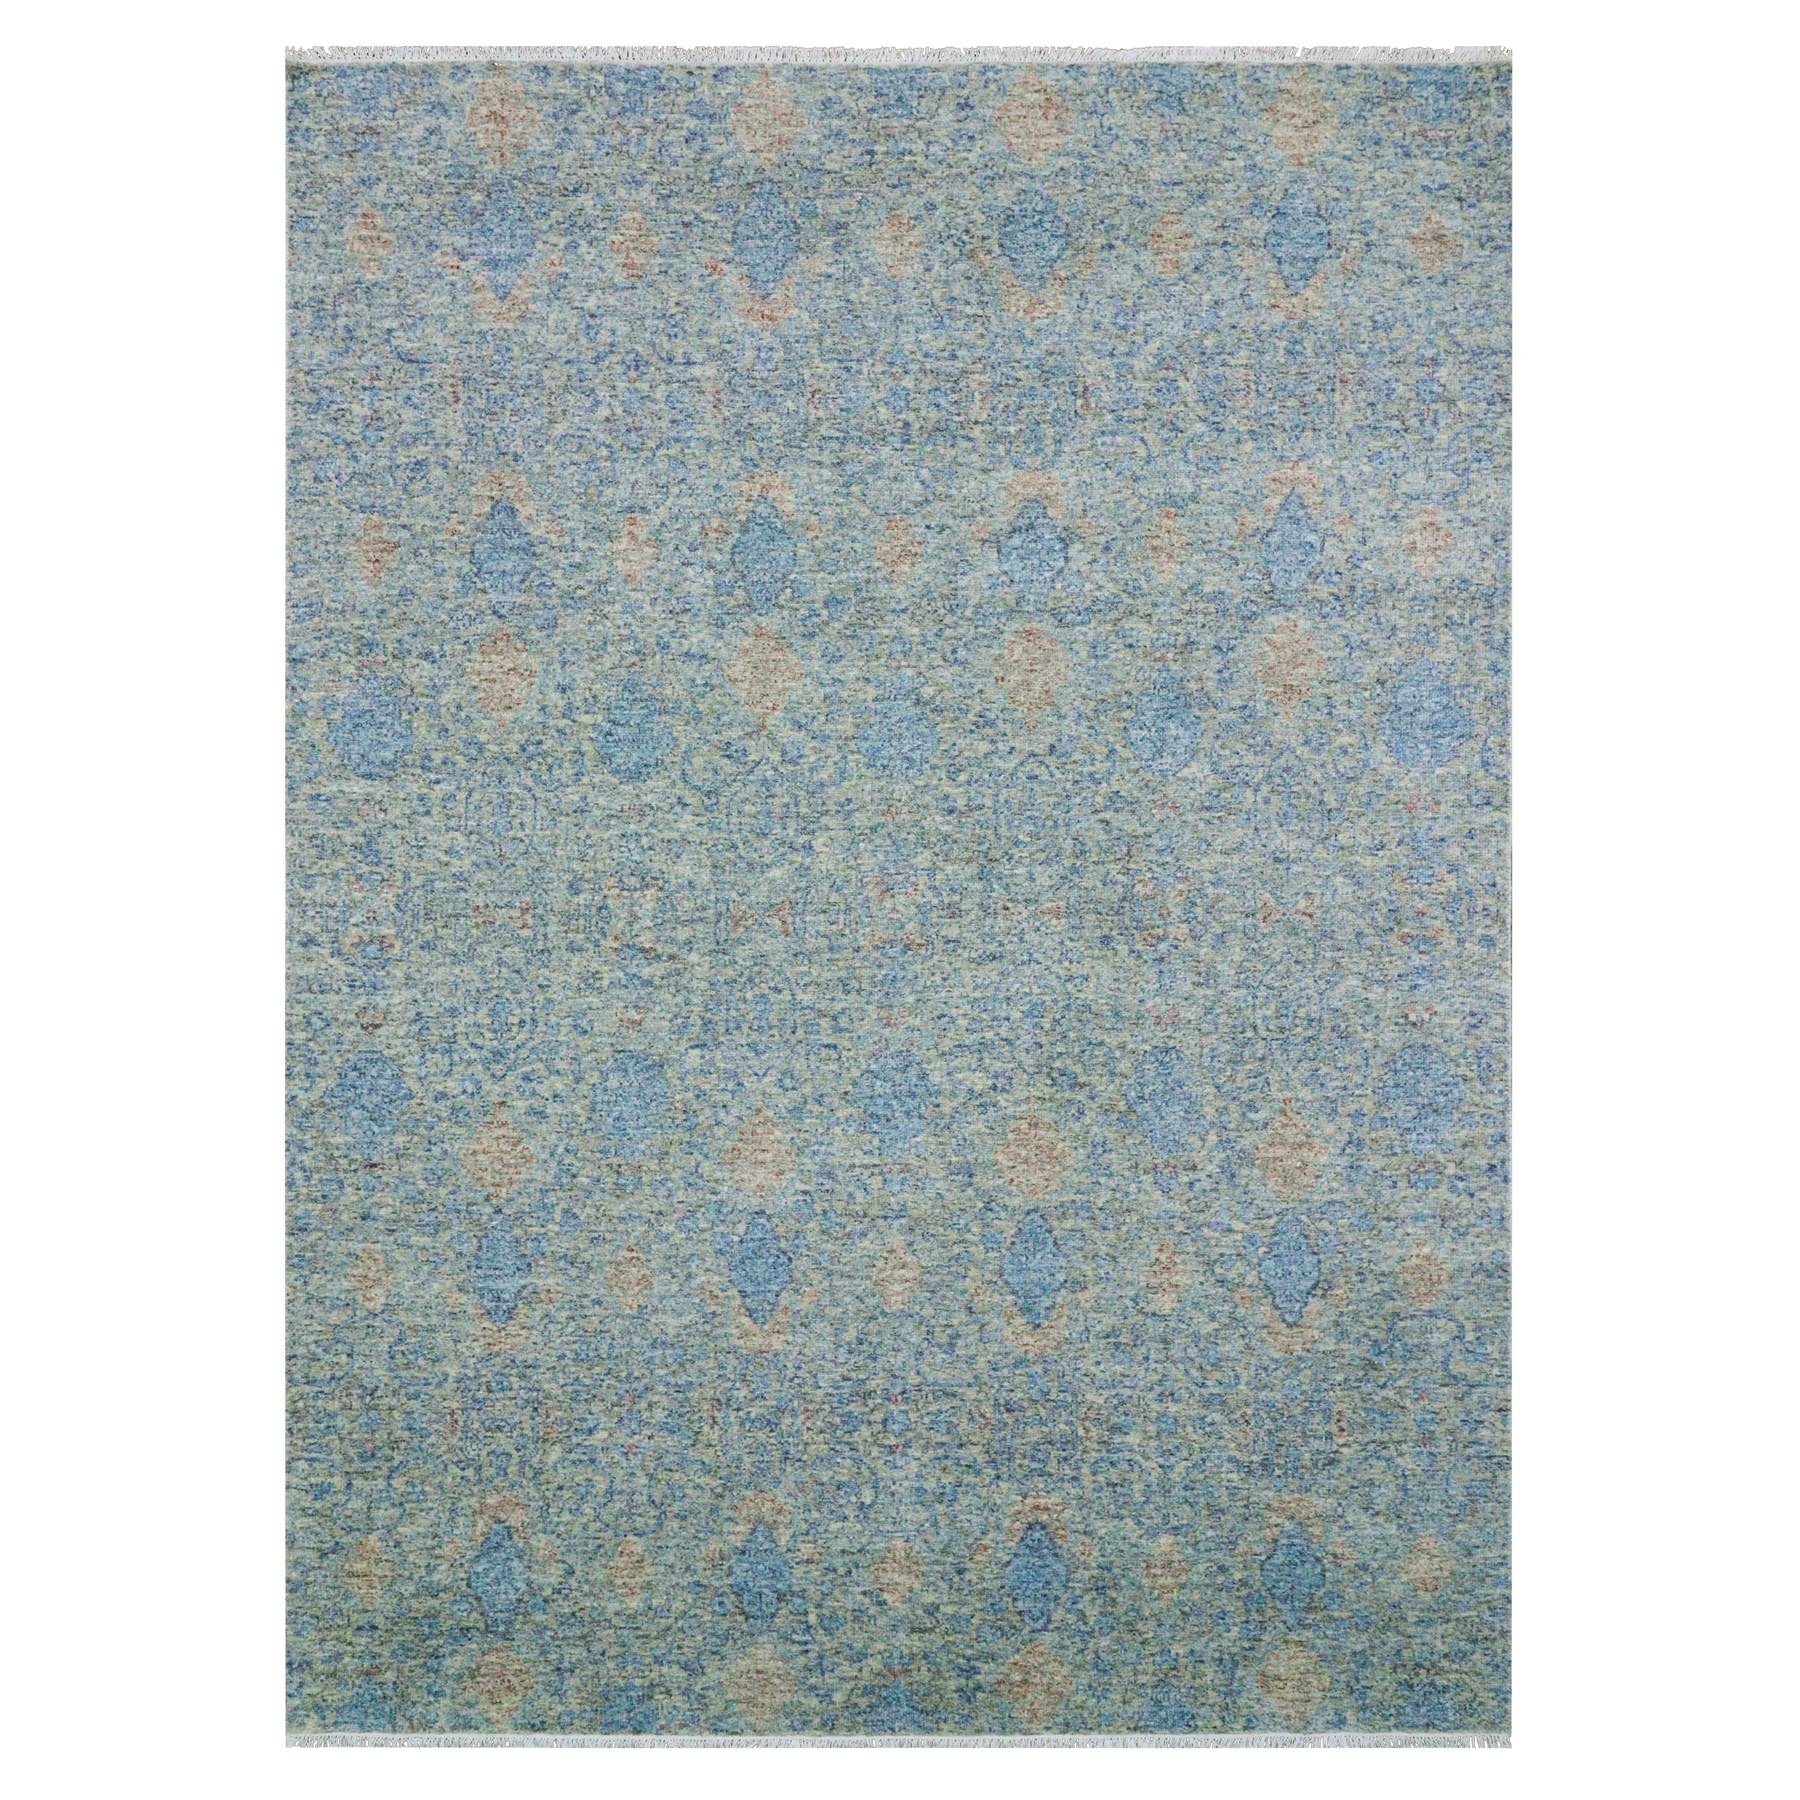  Wool Hand-Knotted Area Rug 8'10